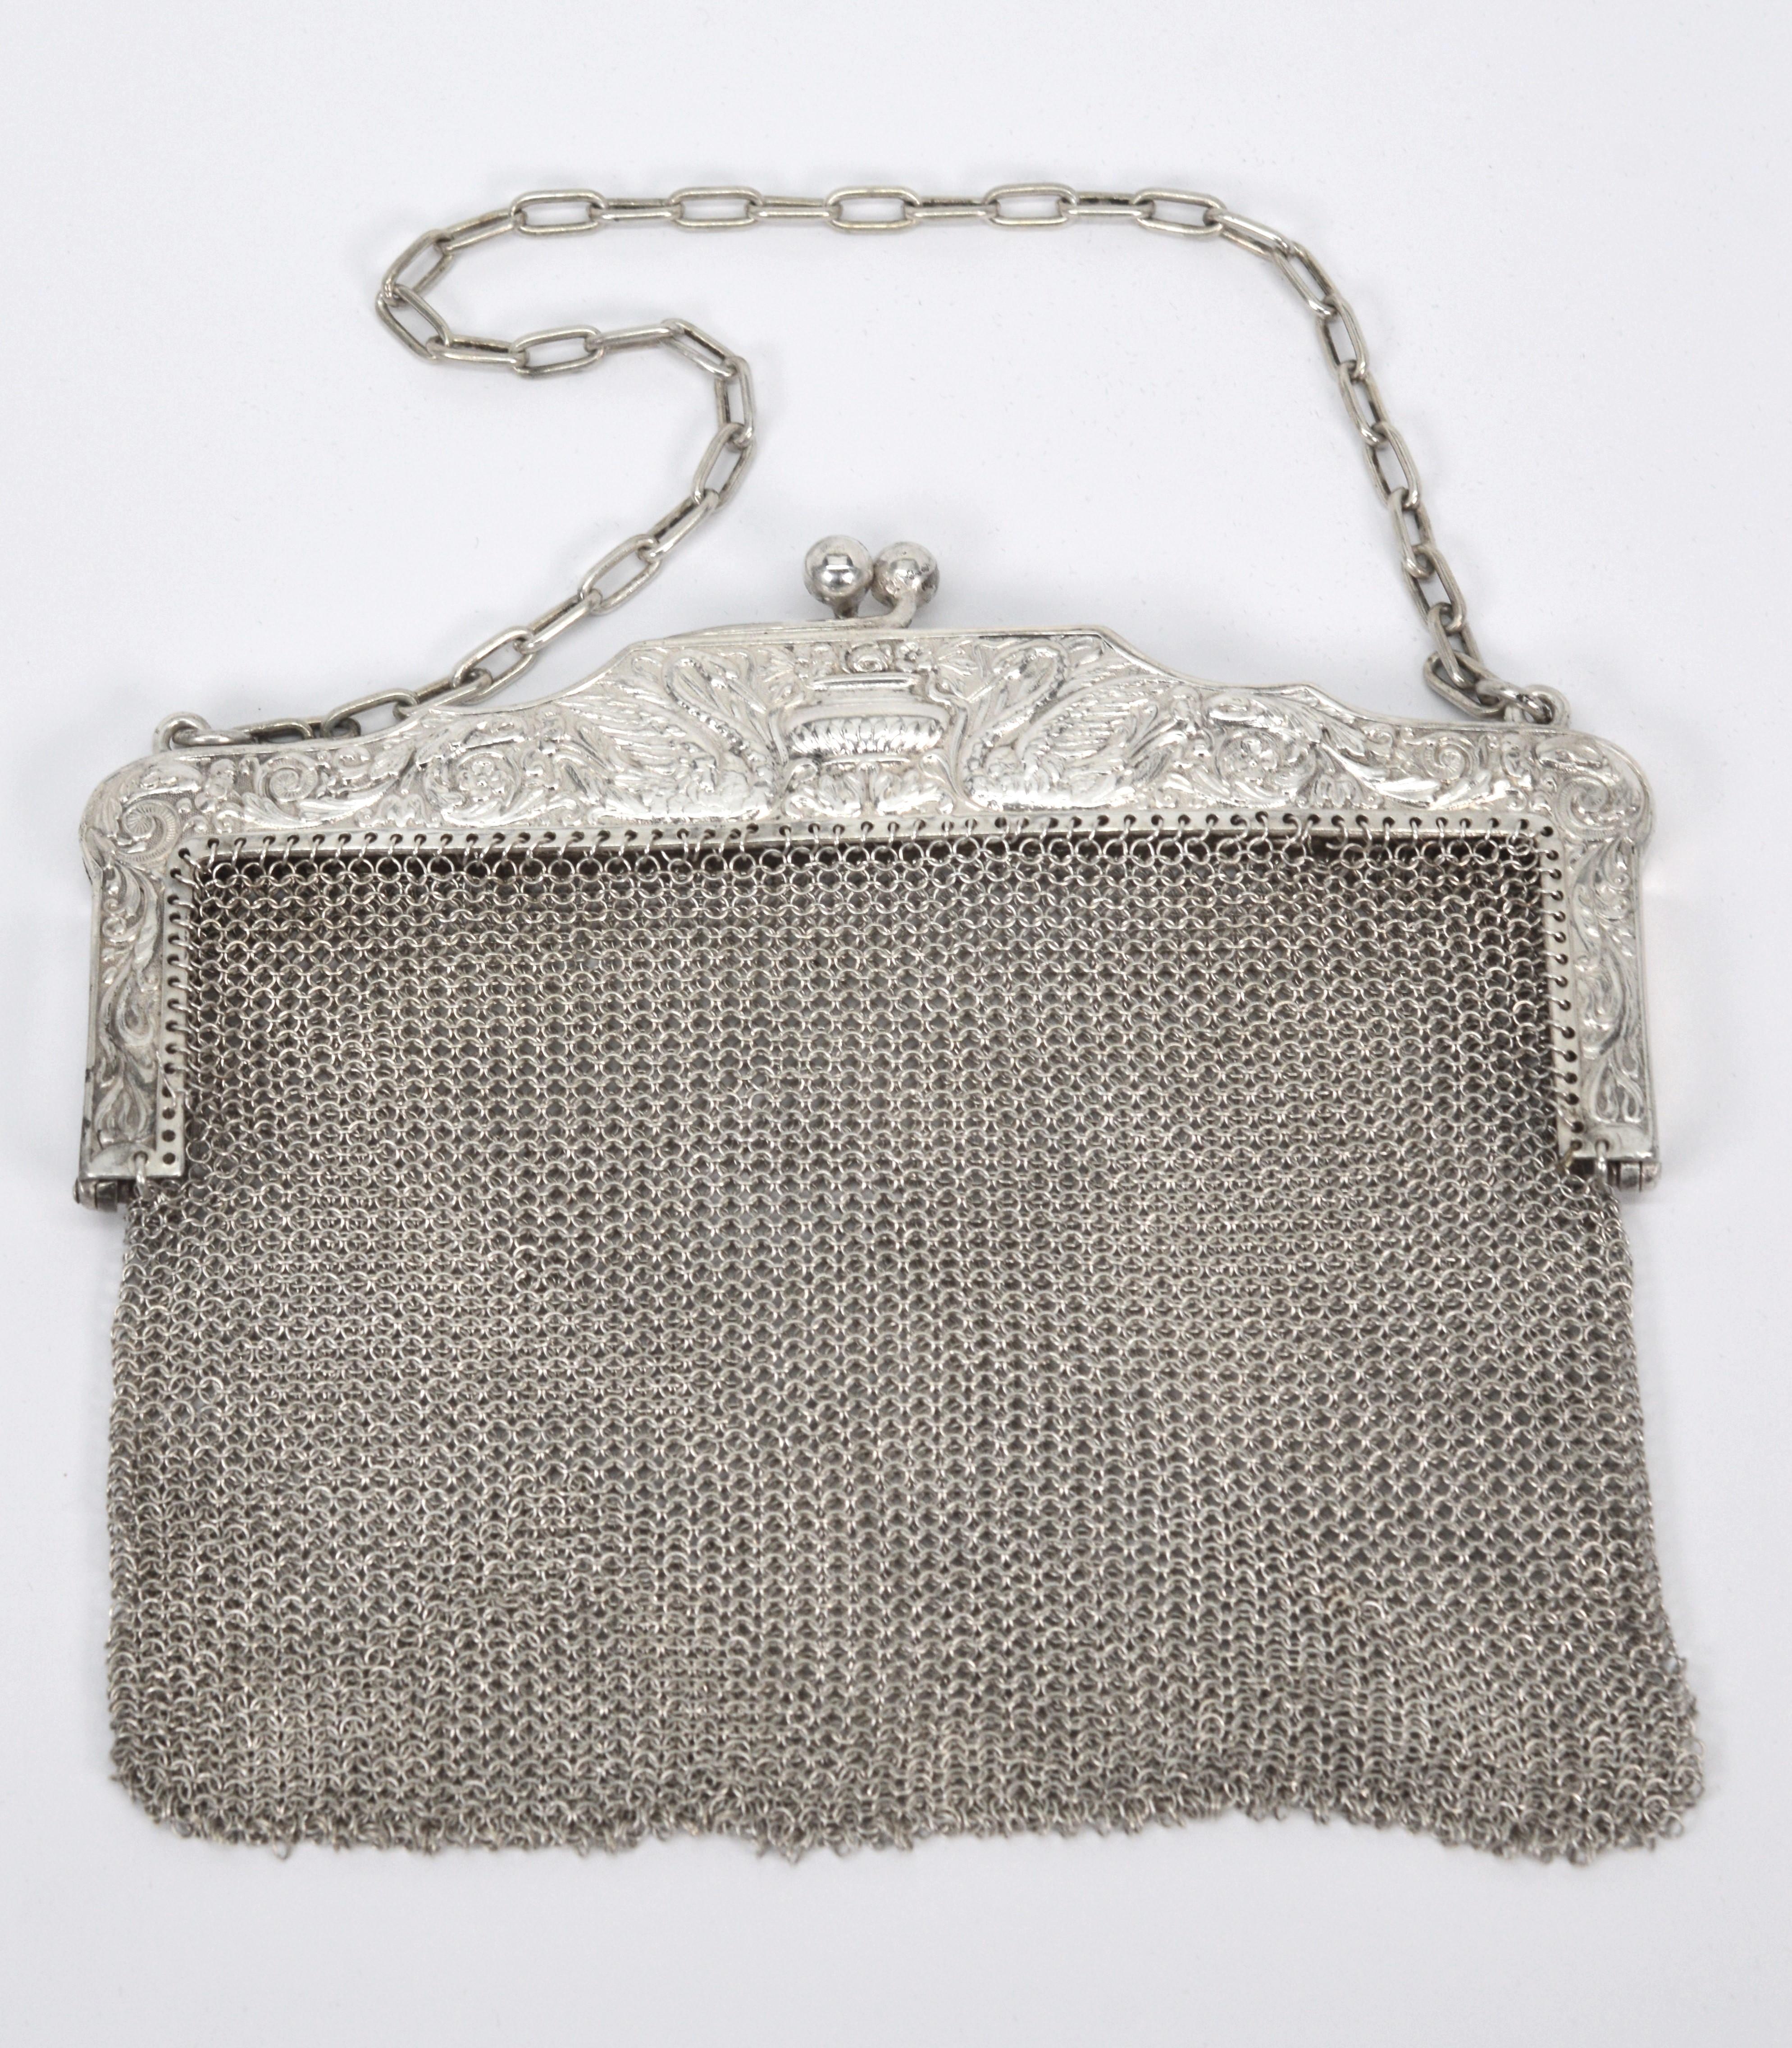 Fabulous vintage accessory for a wedding or special occasion. Circa 1920 American Art Nouveau Ladies evening purse in 870 silver mesh with cable chain handle. Intricate pattern silver with floral and swan details decorate the frame with ball clip